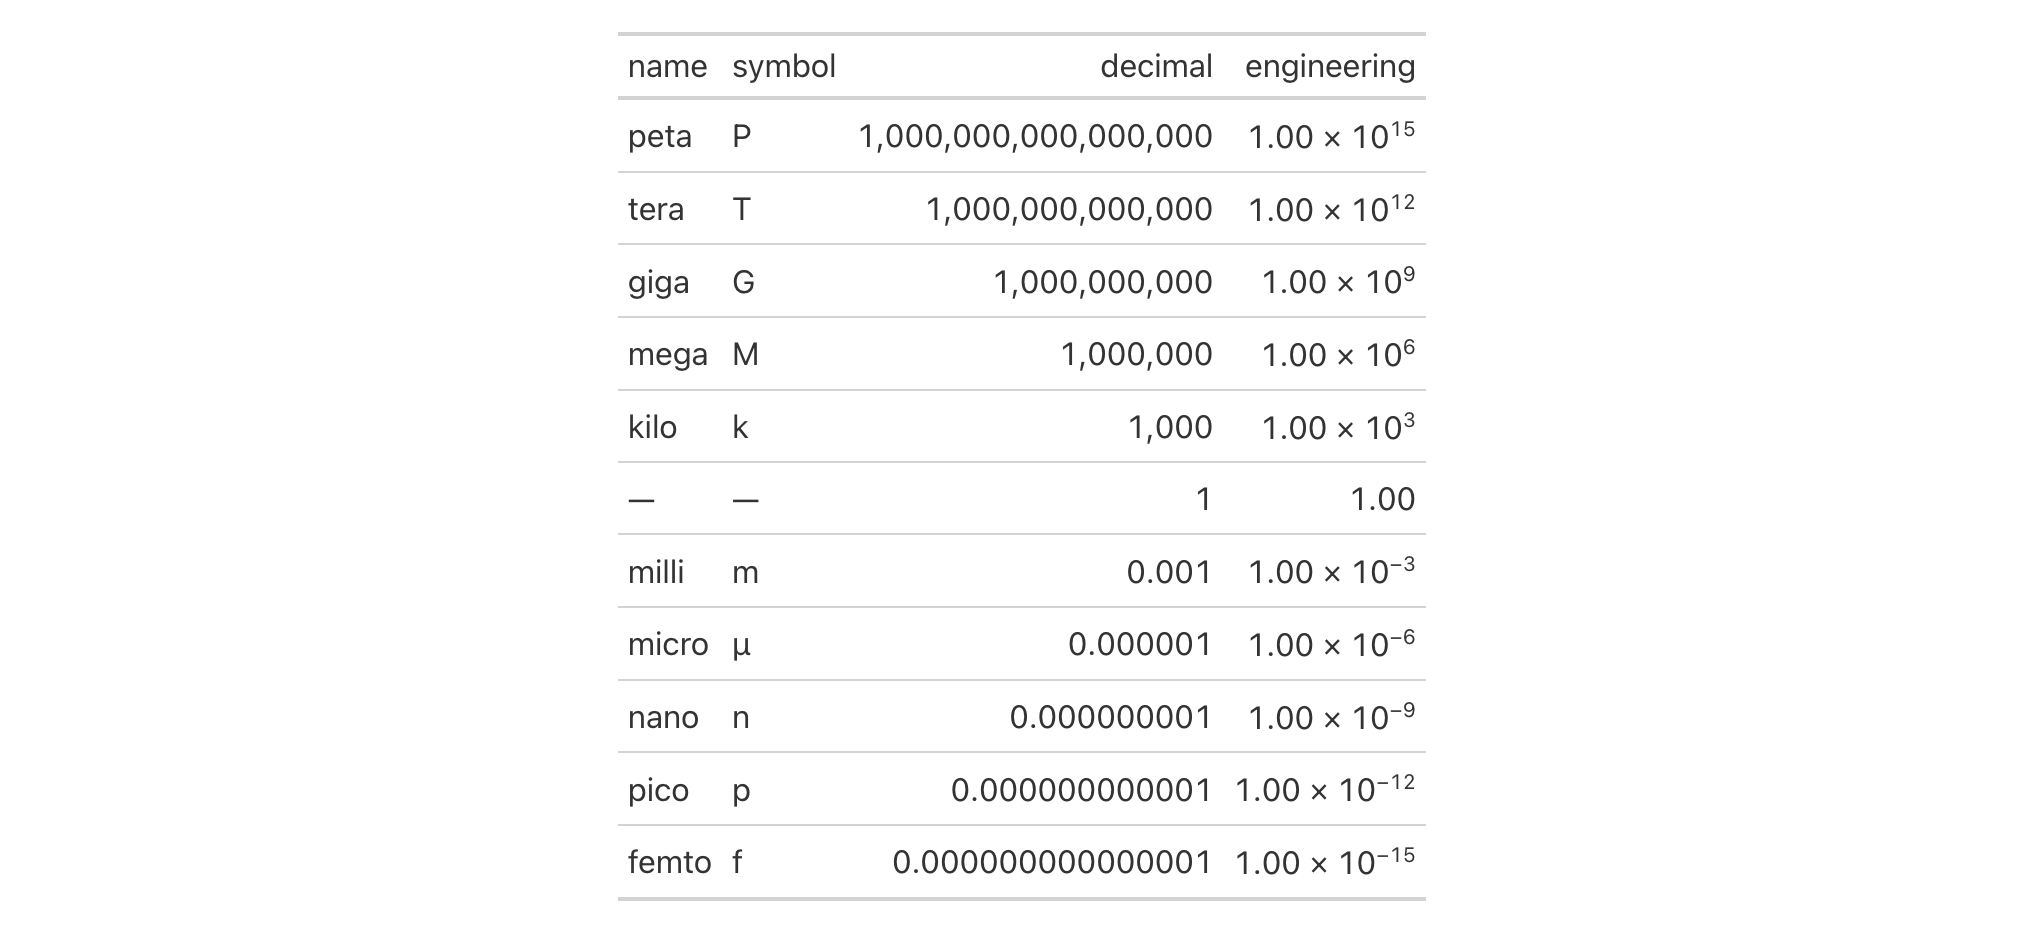 This image of a table was generated from the second code example in the `fmt_engineering()` help file.